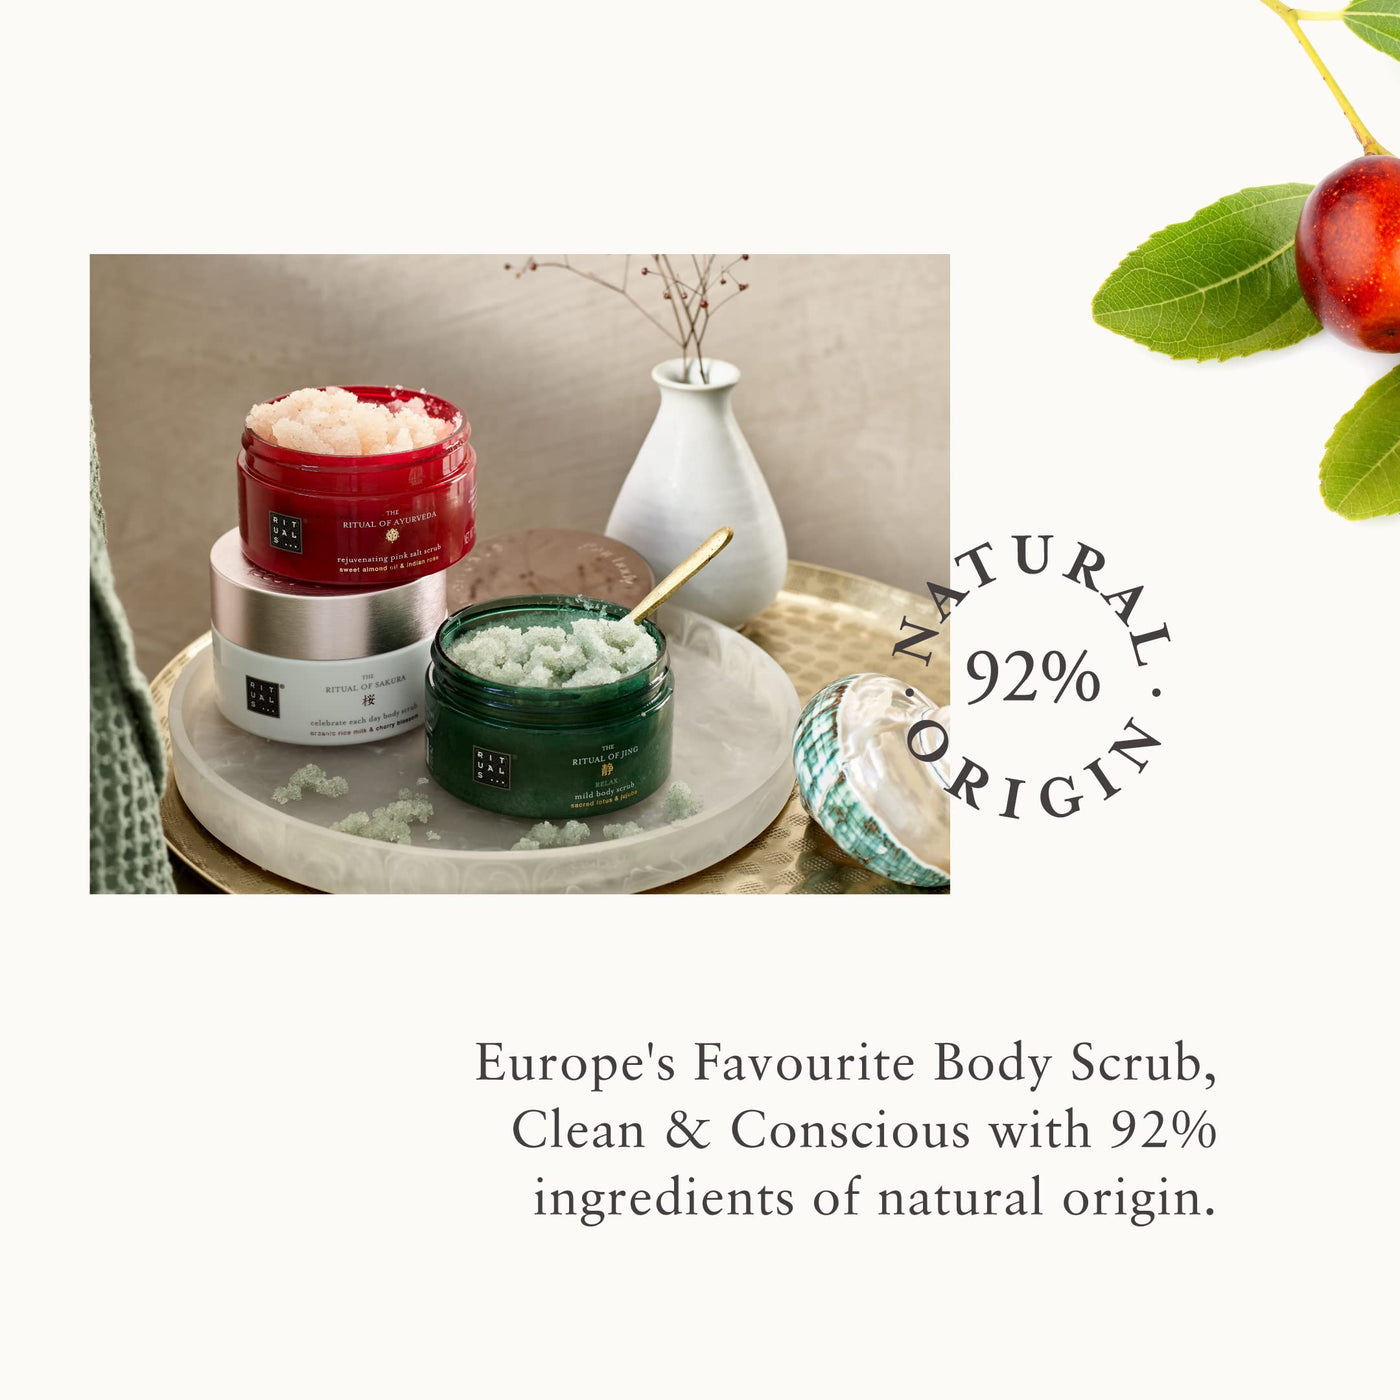 RITUALS Body Scrub from The Ritual of Jing, 300 gr - With Sacred Lotus,  Jujube & Chinese Mint - Relaxing & Calming Properties with Magnesium Salt